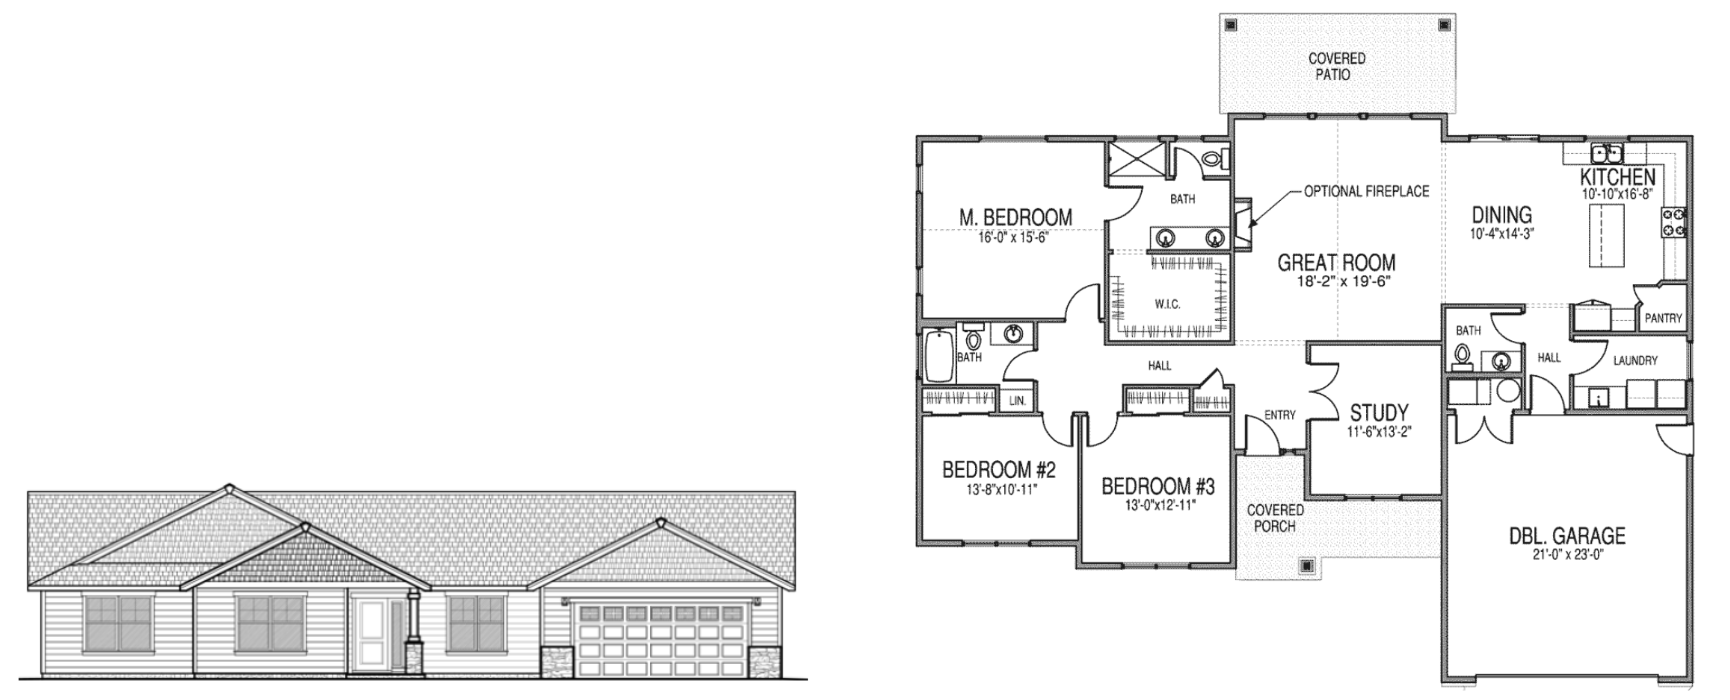 Washington single story home floor plan with a master bedroom with a walk in closet and bathroom, 2 additional bedrooms, another bathroom, a great room, dining space, kitchen, pantry, laundry room, study, double garage, and a covered porch and patio